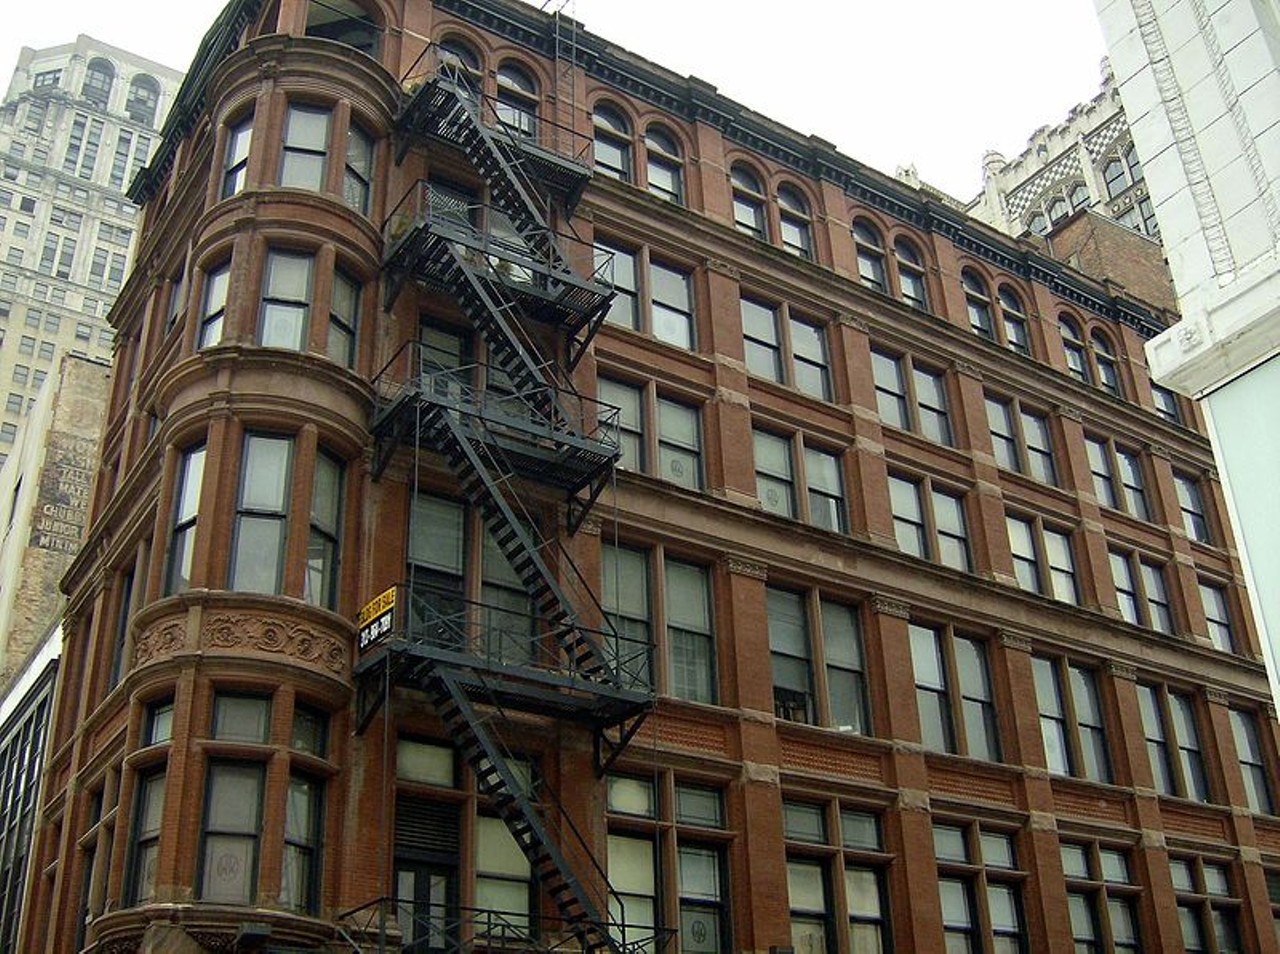 Lois Lane&#146;s Apartment
Now home to John Varvatos first store in the midwest, 1500 Woodward played the part of Lois Lane&#146;s apartment, it&#146;s classic fire escape acting as a perfect landing pad for her flying sweetheart. (Photo Credit: MikeRussell via Wikimedia Commons)